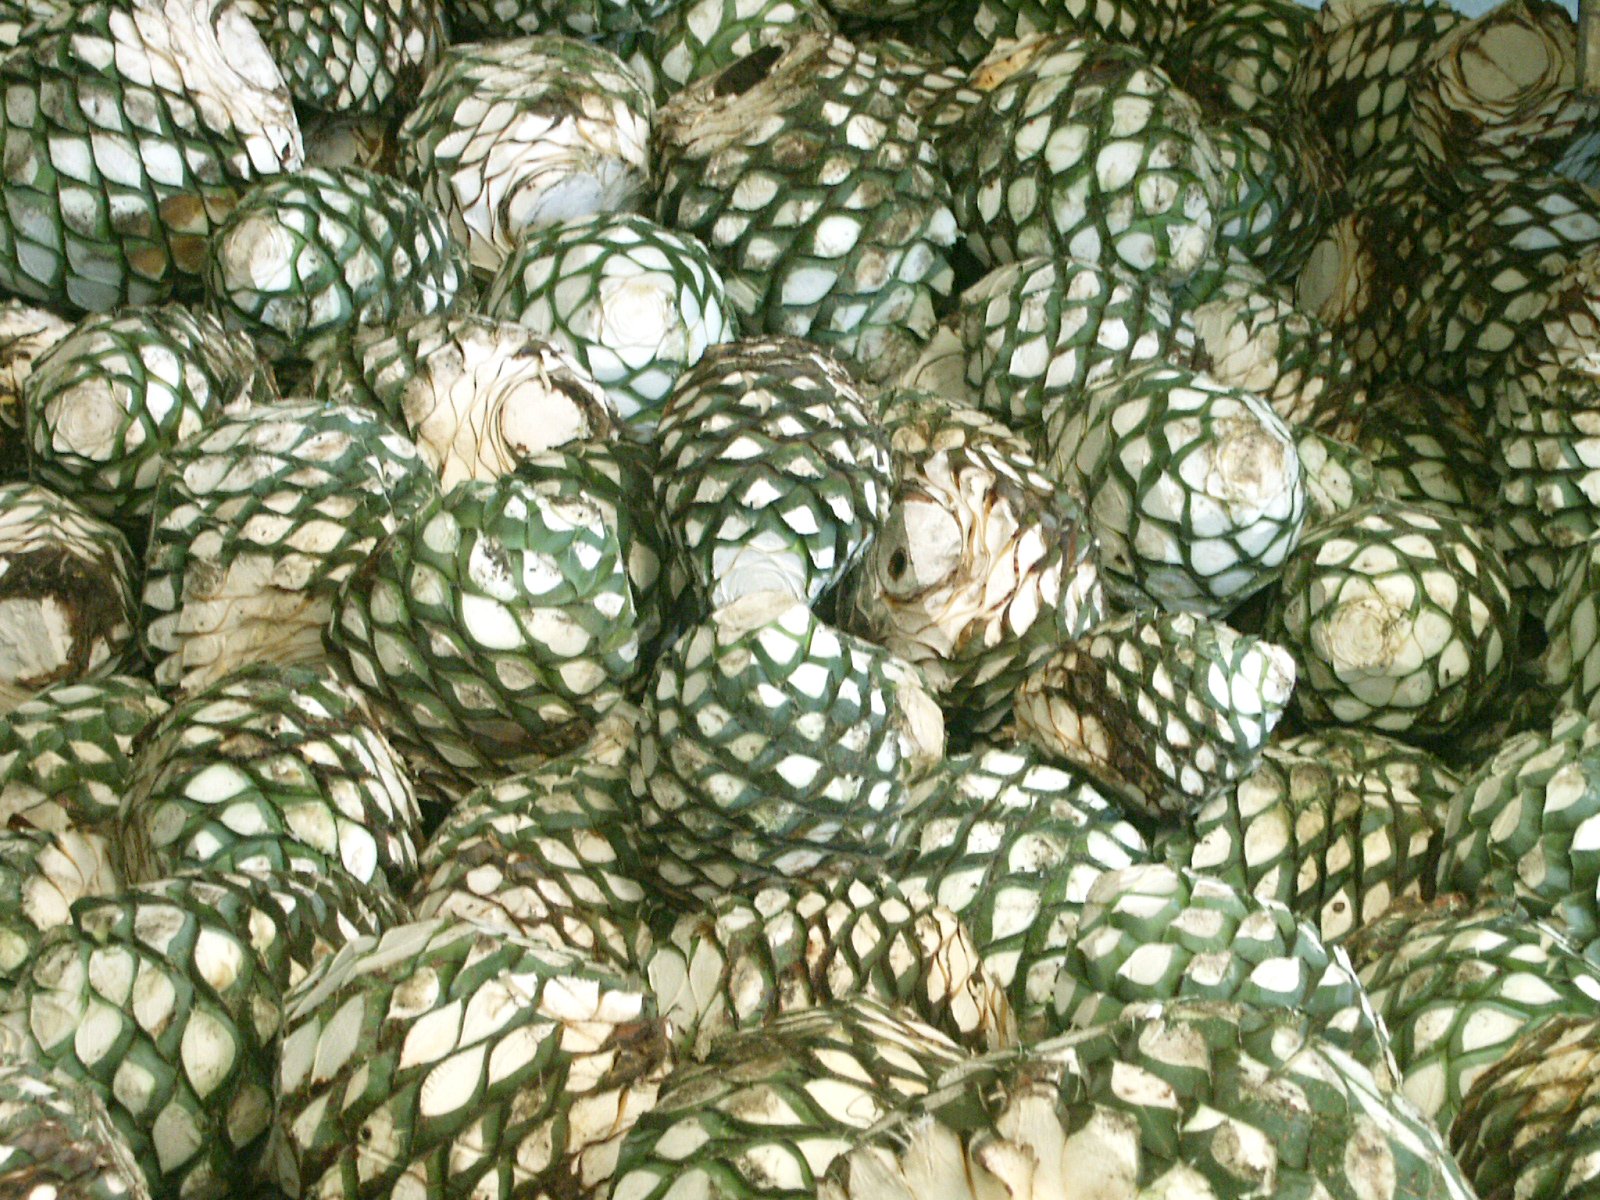 several large pieces of green and white net